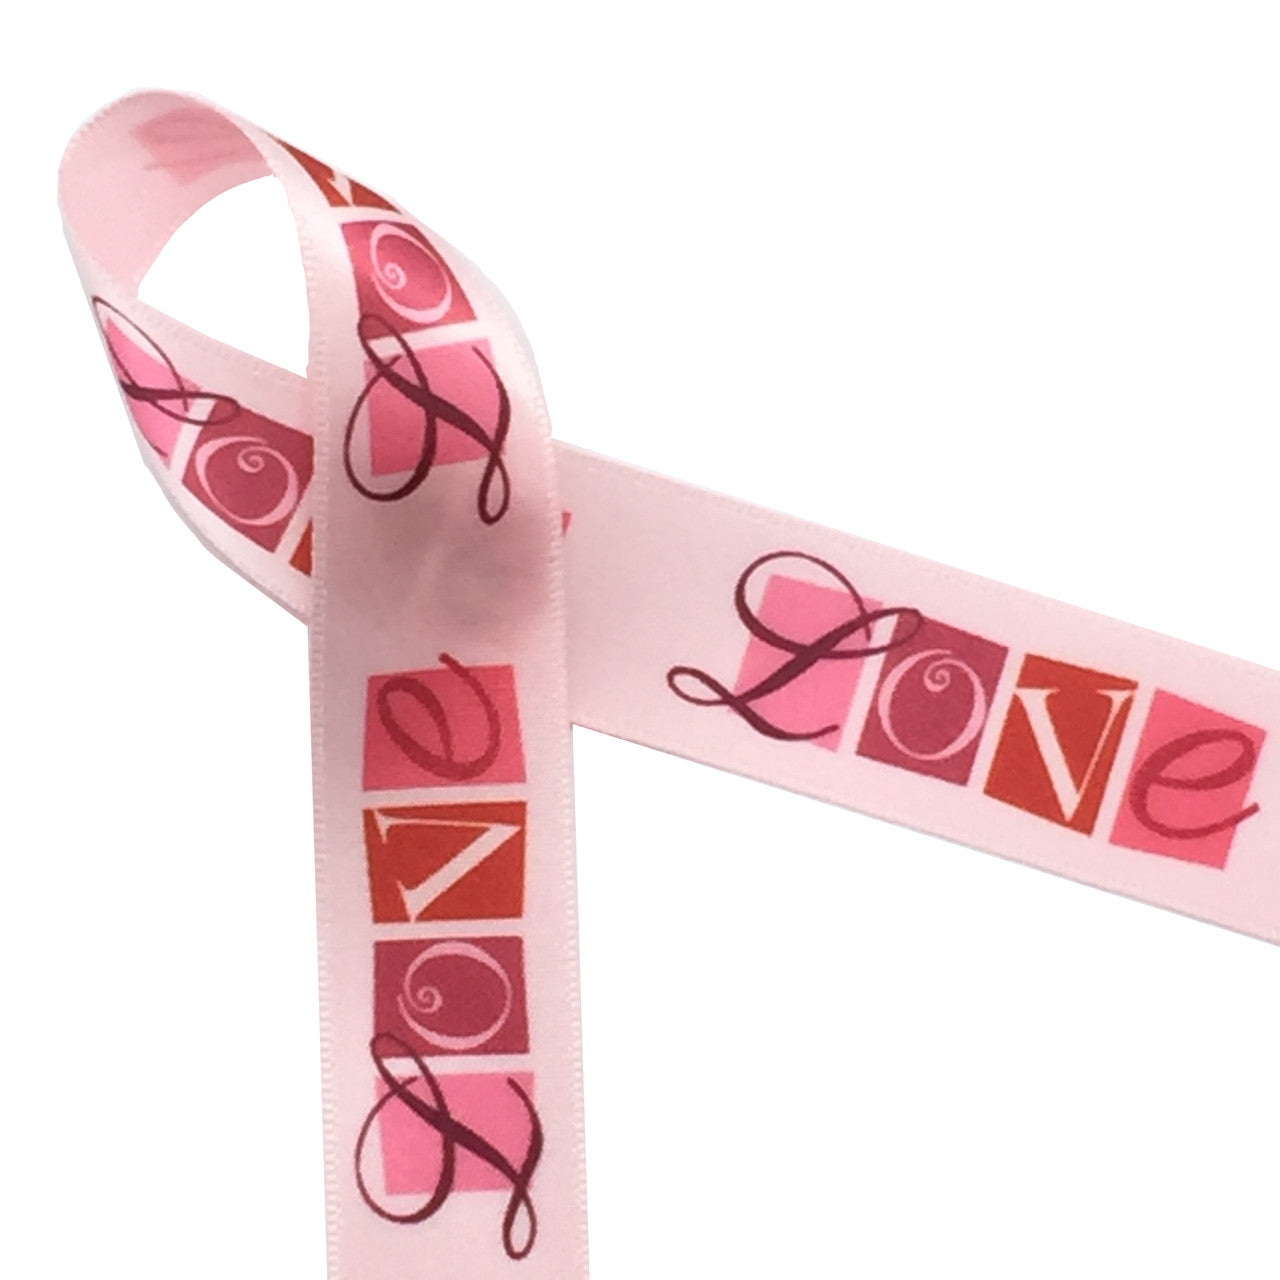 Baby Pink Ribbons 7/8 width Pre-Cut to ANY LENGTH!